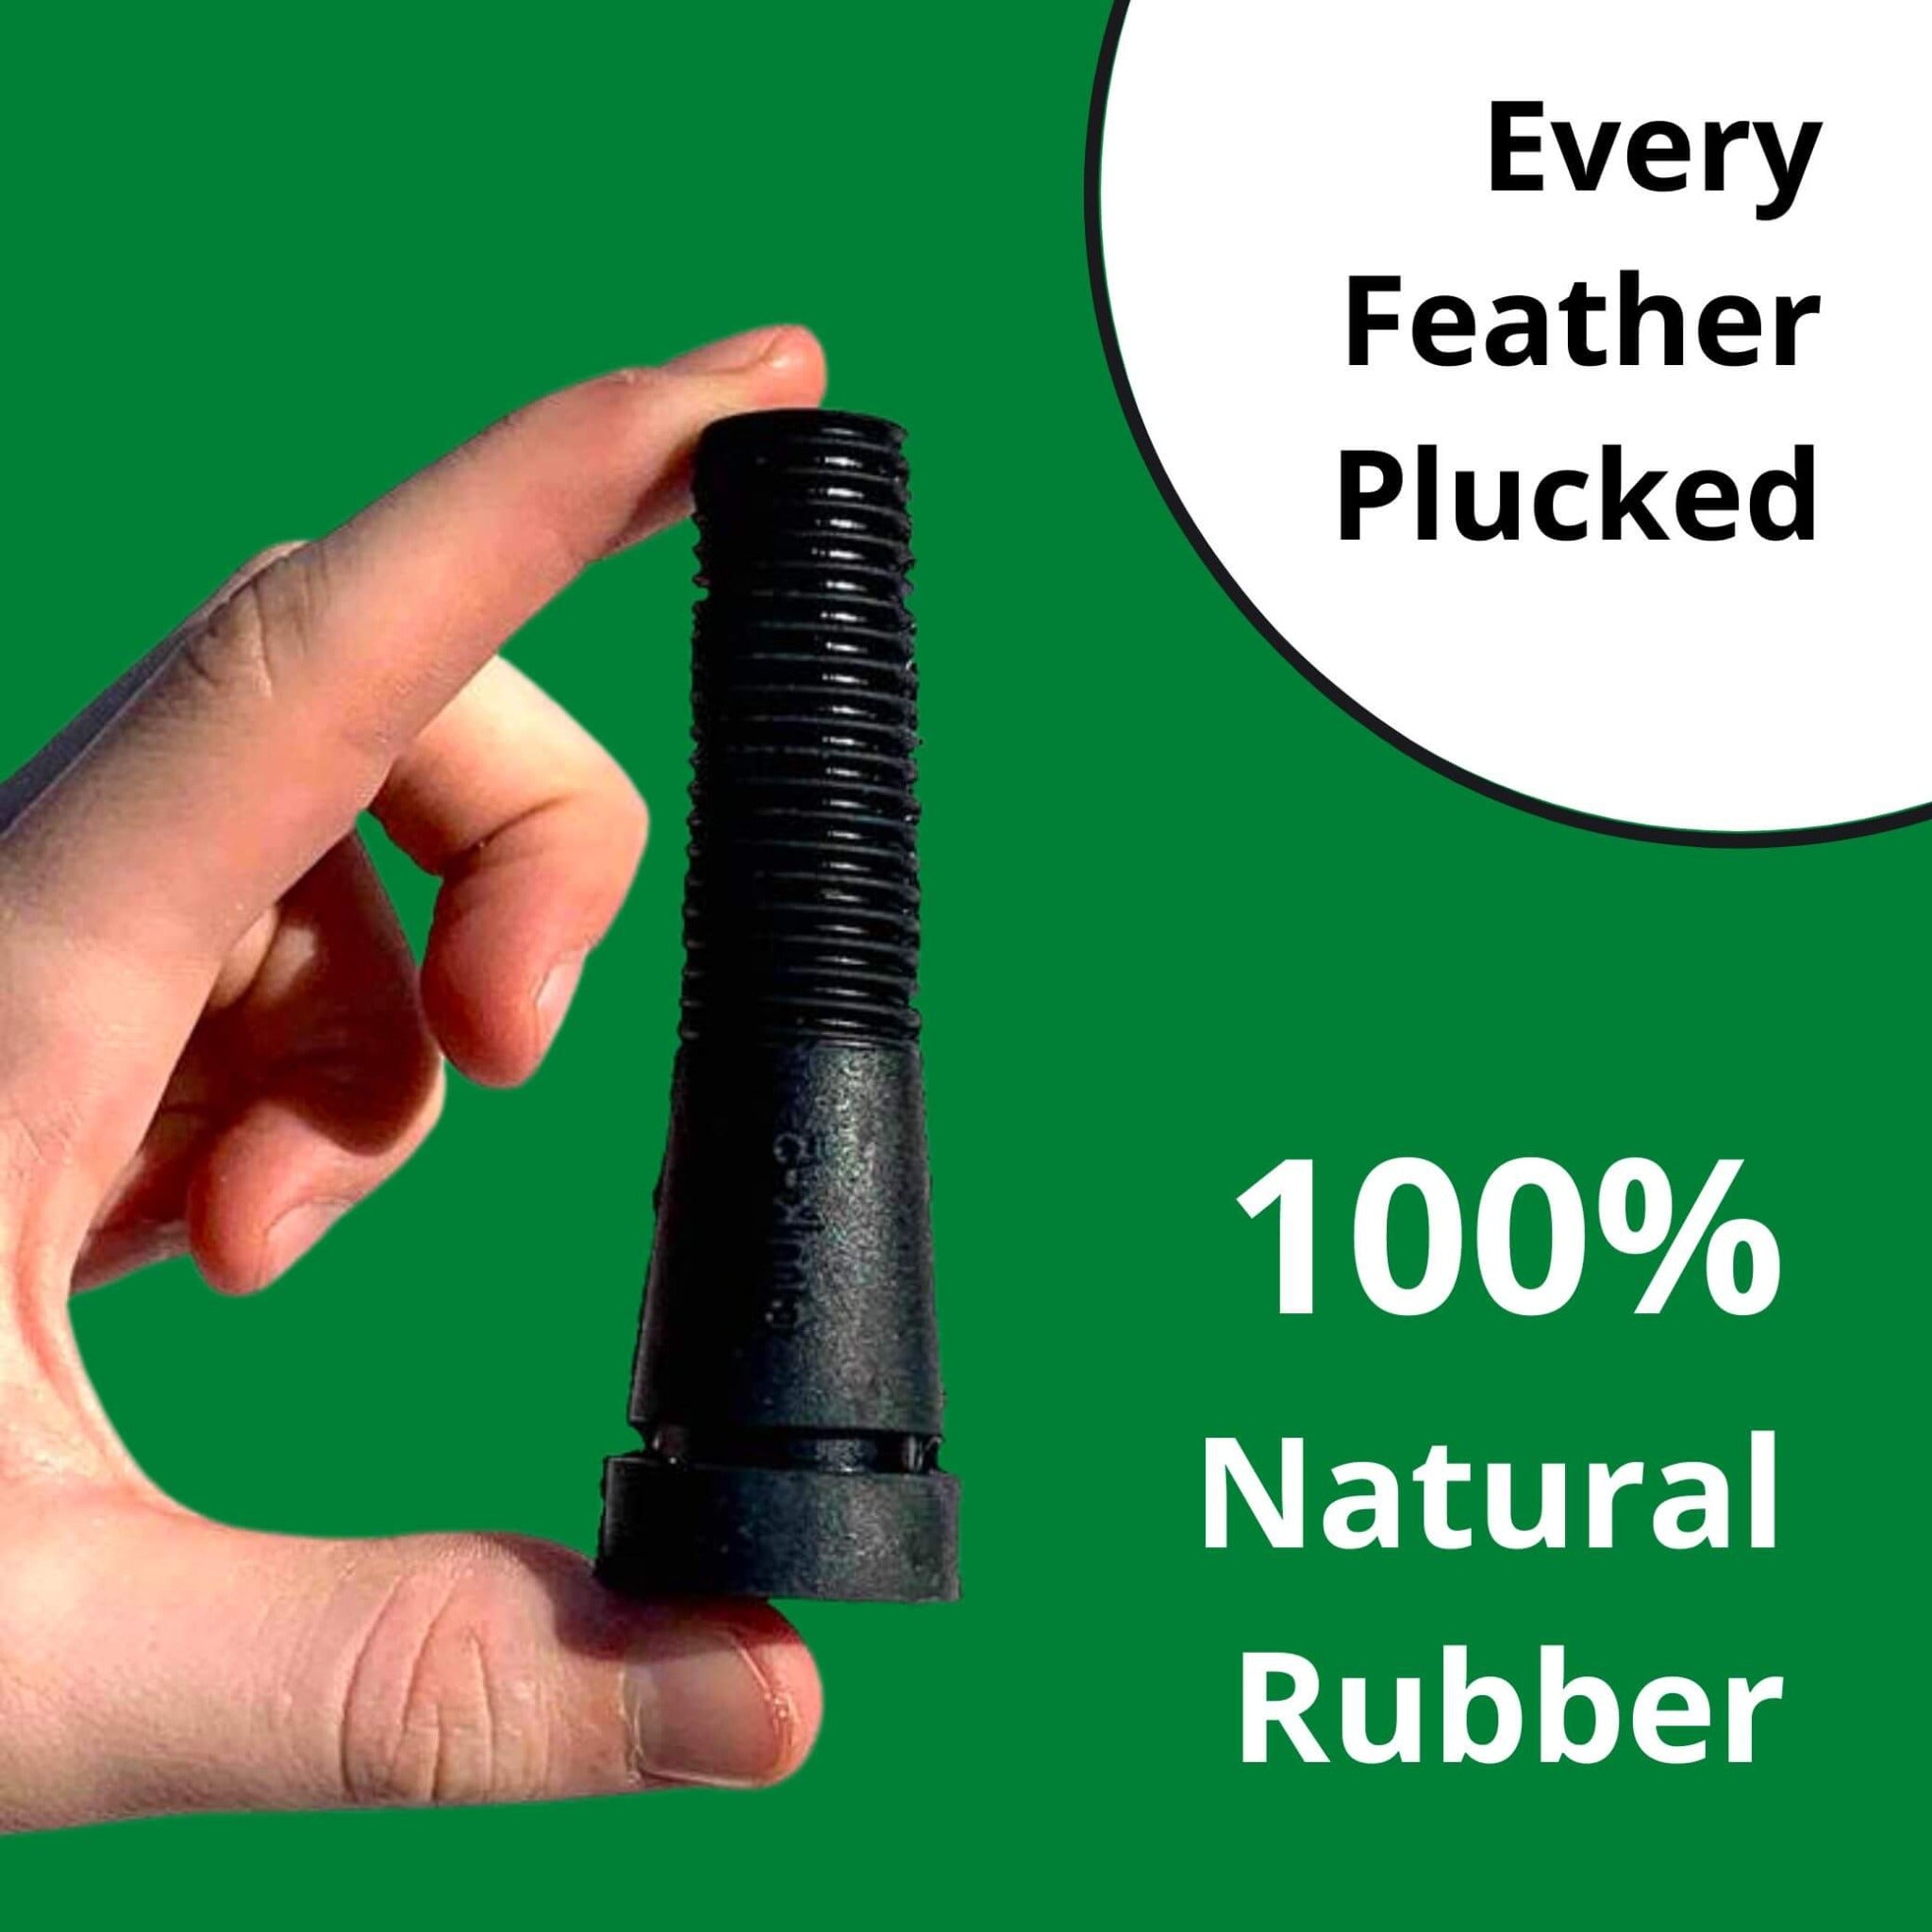 Hatching Time Cimuka. Image of plucker finger being held in hand. Text reads "every feather plucked 100% natural rubber.